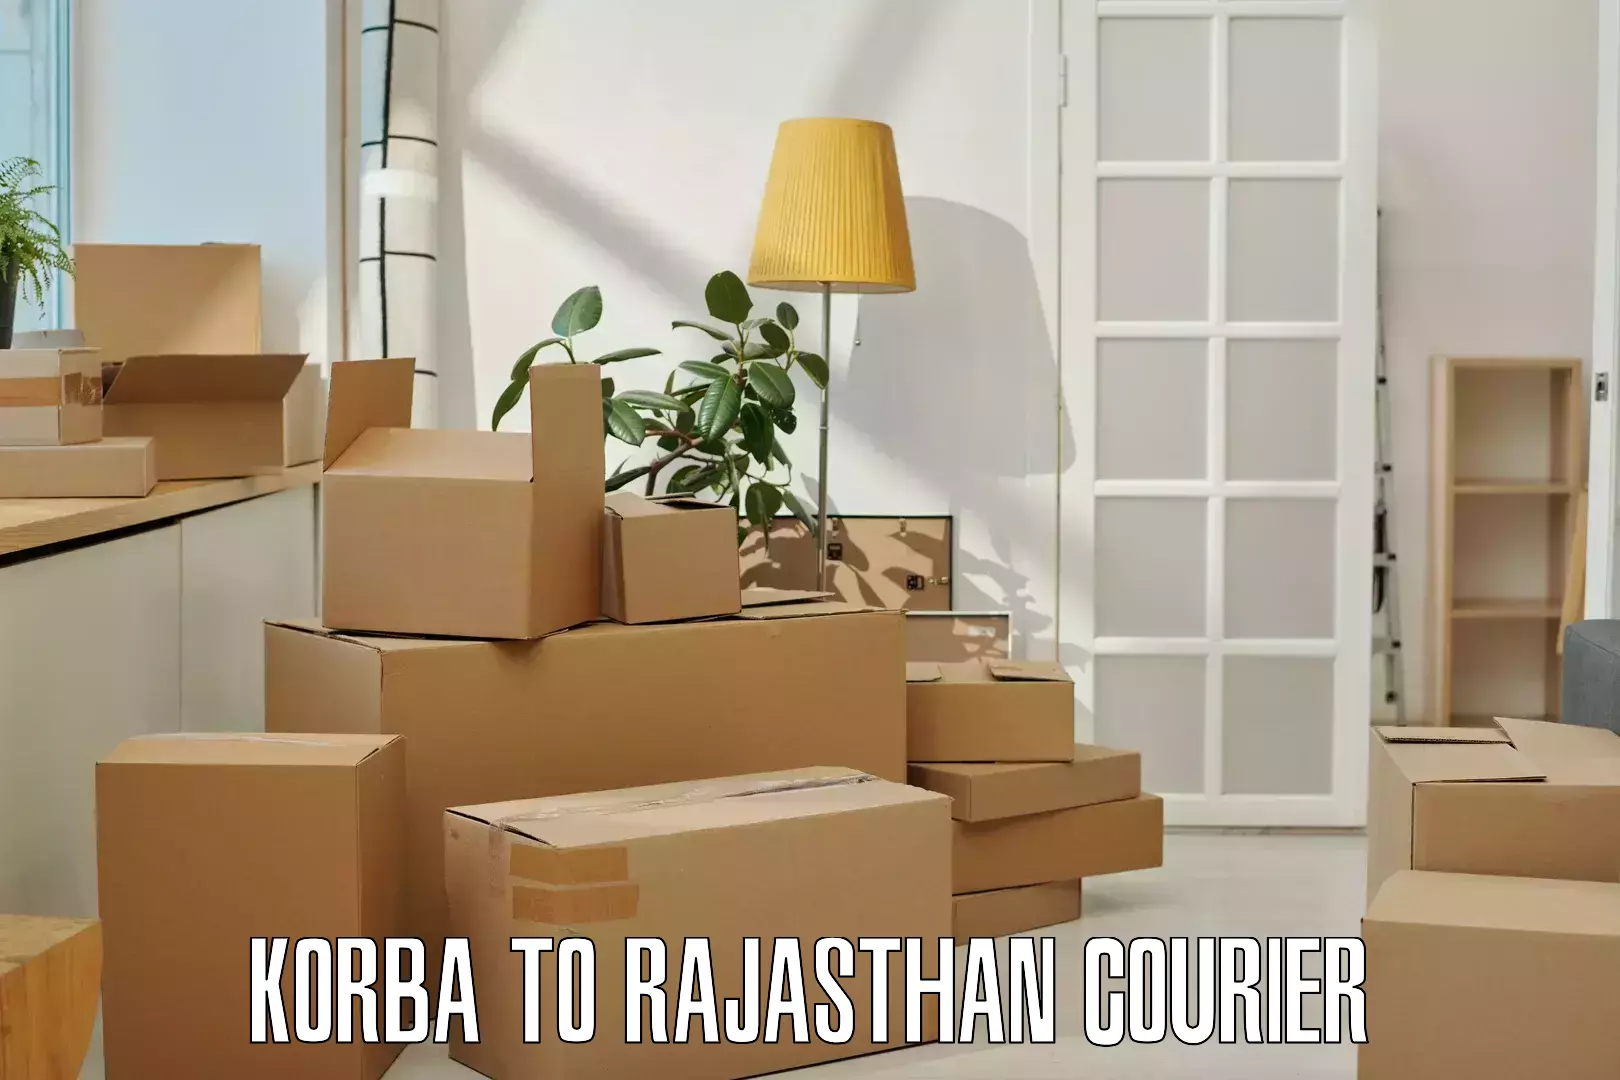 Cost-effective shipping solutions Korba to Jaipur